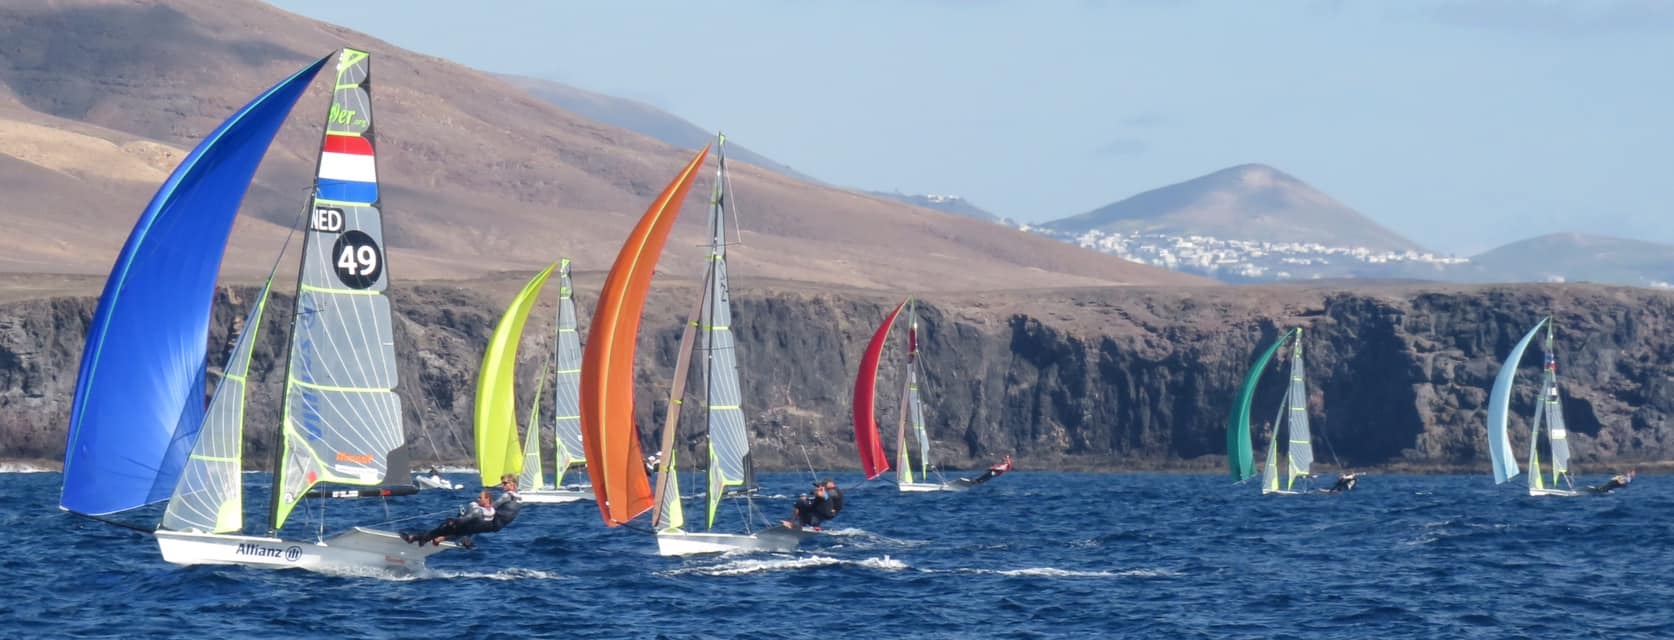  Olympic Classes  Lanzarote Olympic Week  Lanzarote ESP  Part I  Final results  Barnes/DallmanWeiss USA 7th in 470 women